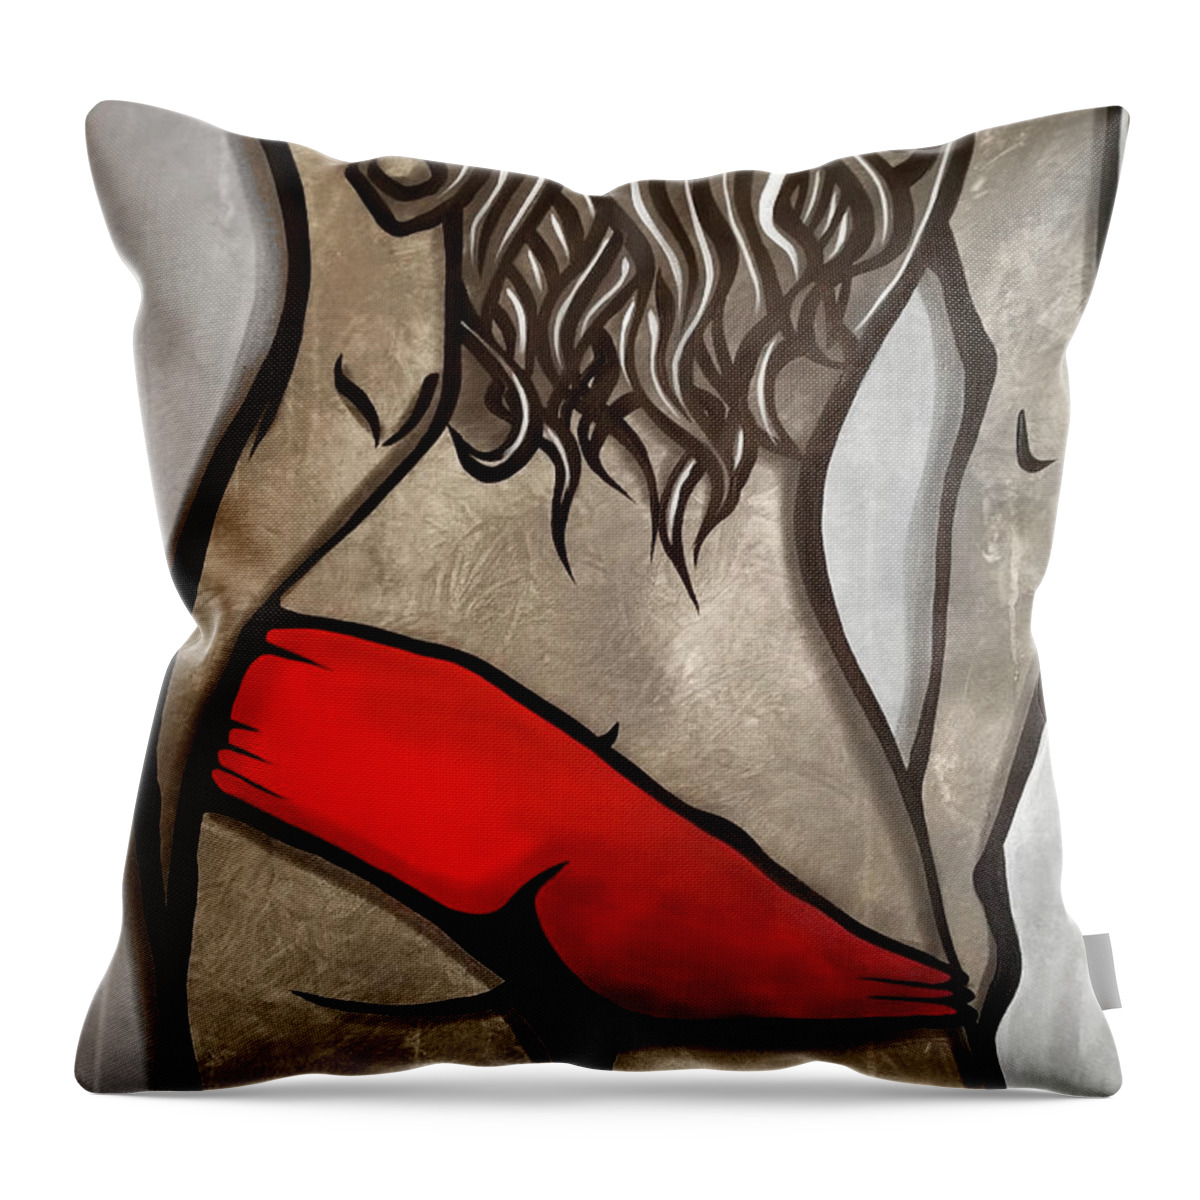 Fidostudio Throw Pillow featuring the painting Soul Sister by Tom Fedro